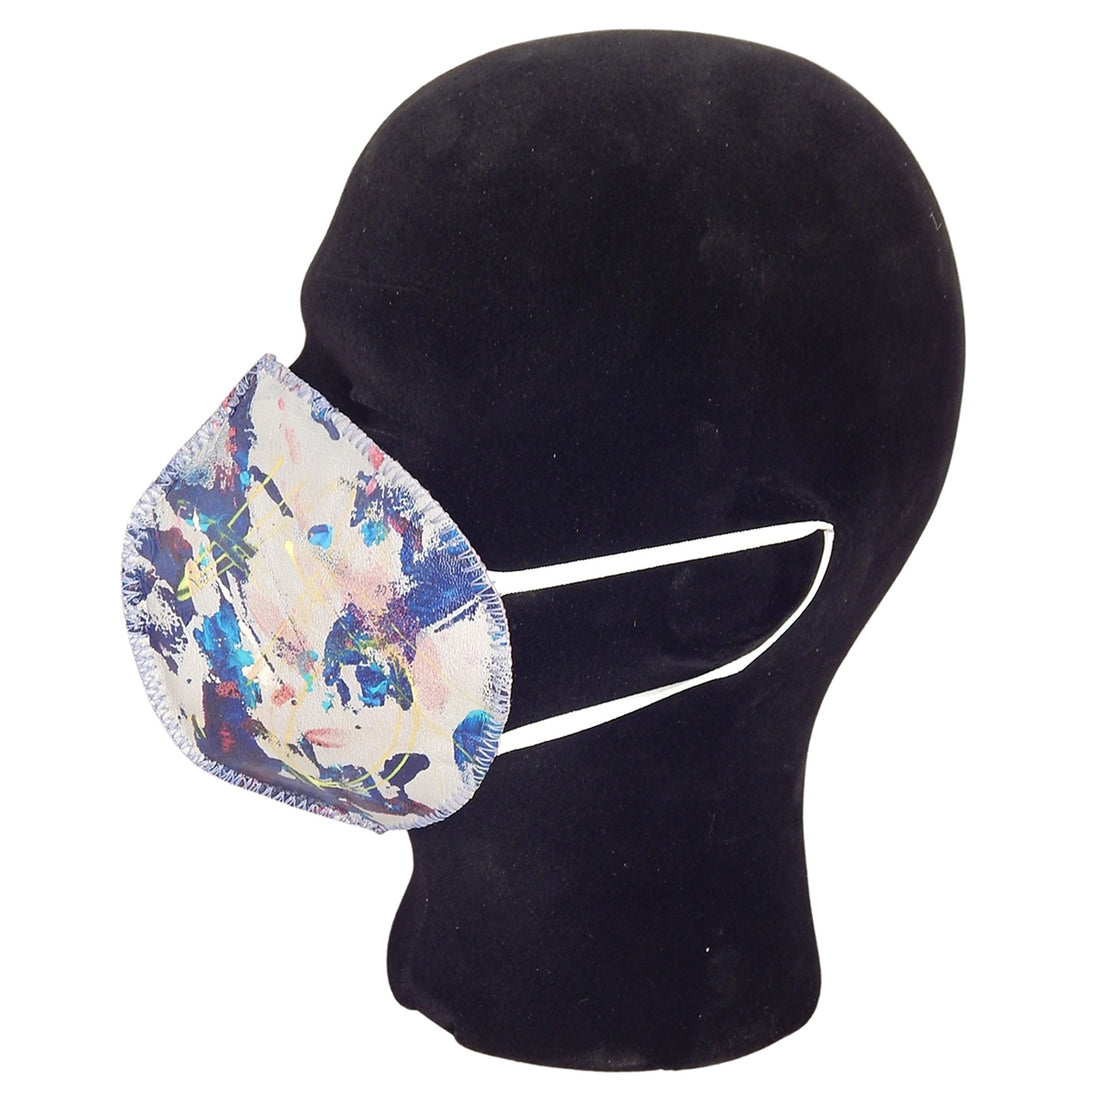 Anton - ABSTRACT Leather COVID MASK in Light Grey